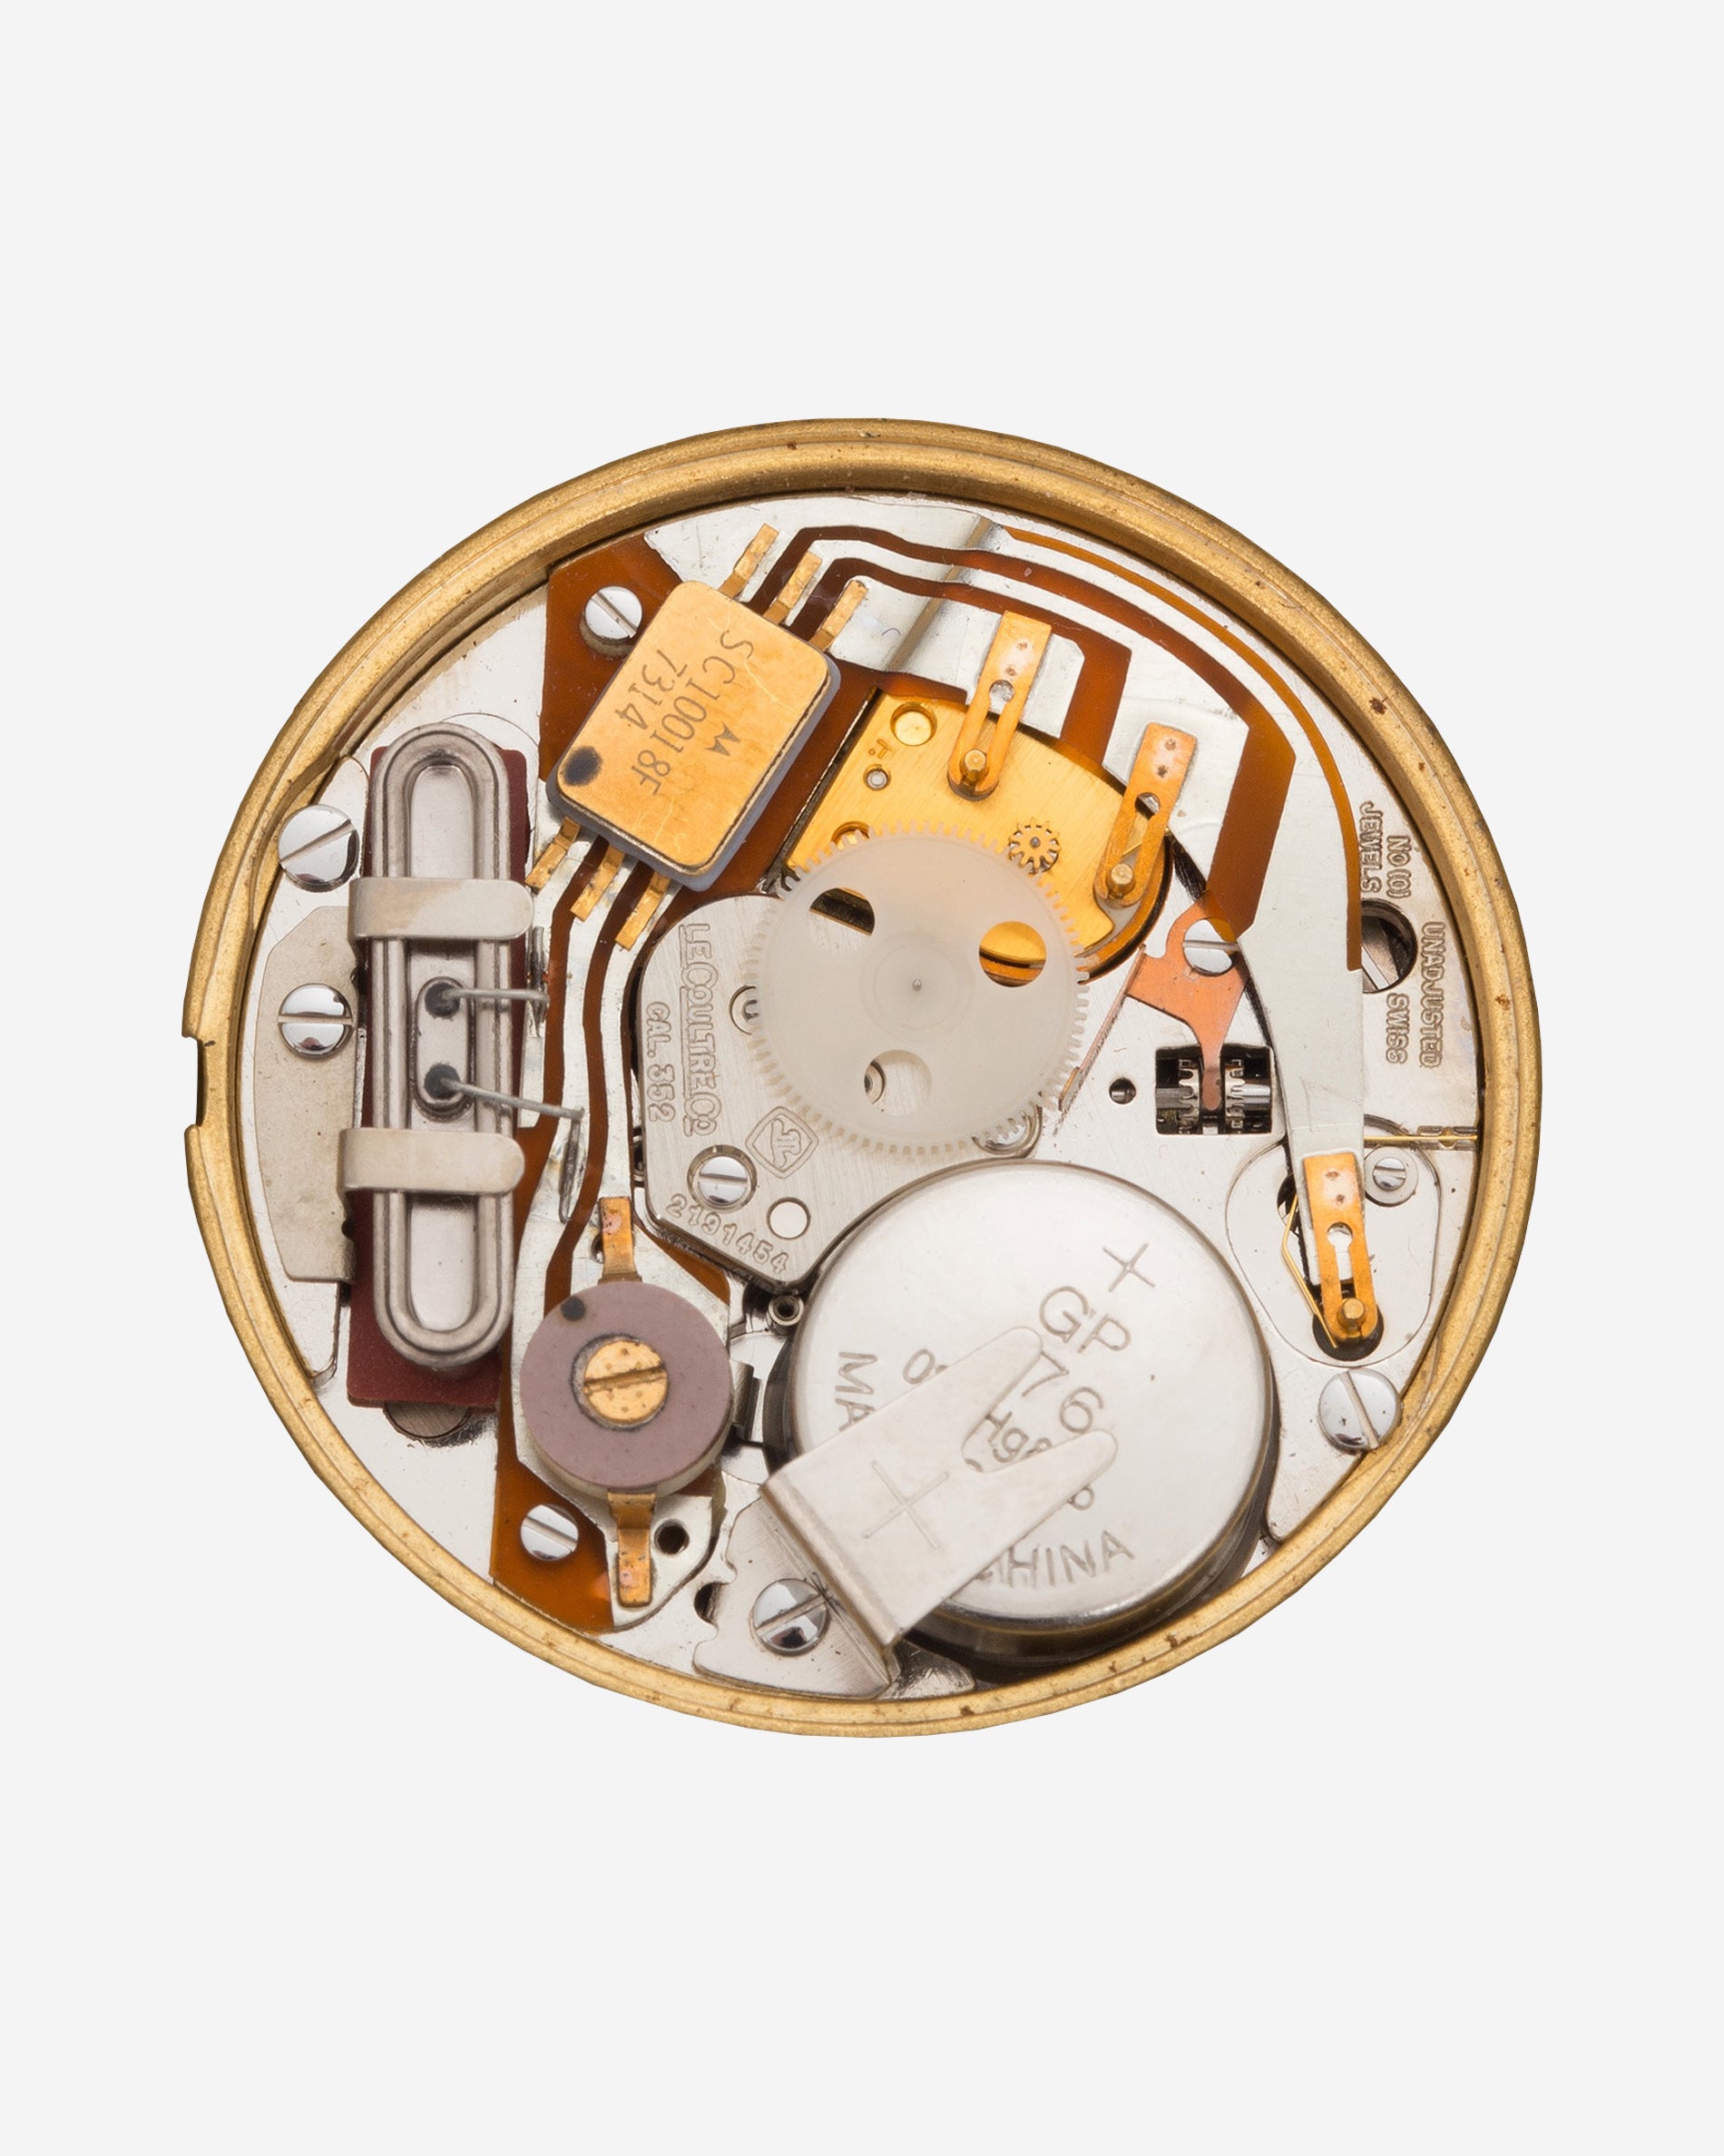 The Jaeger-LeCoultre calibre 352 quartz movement from A Collected Man London